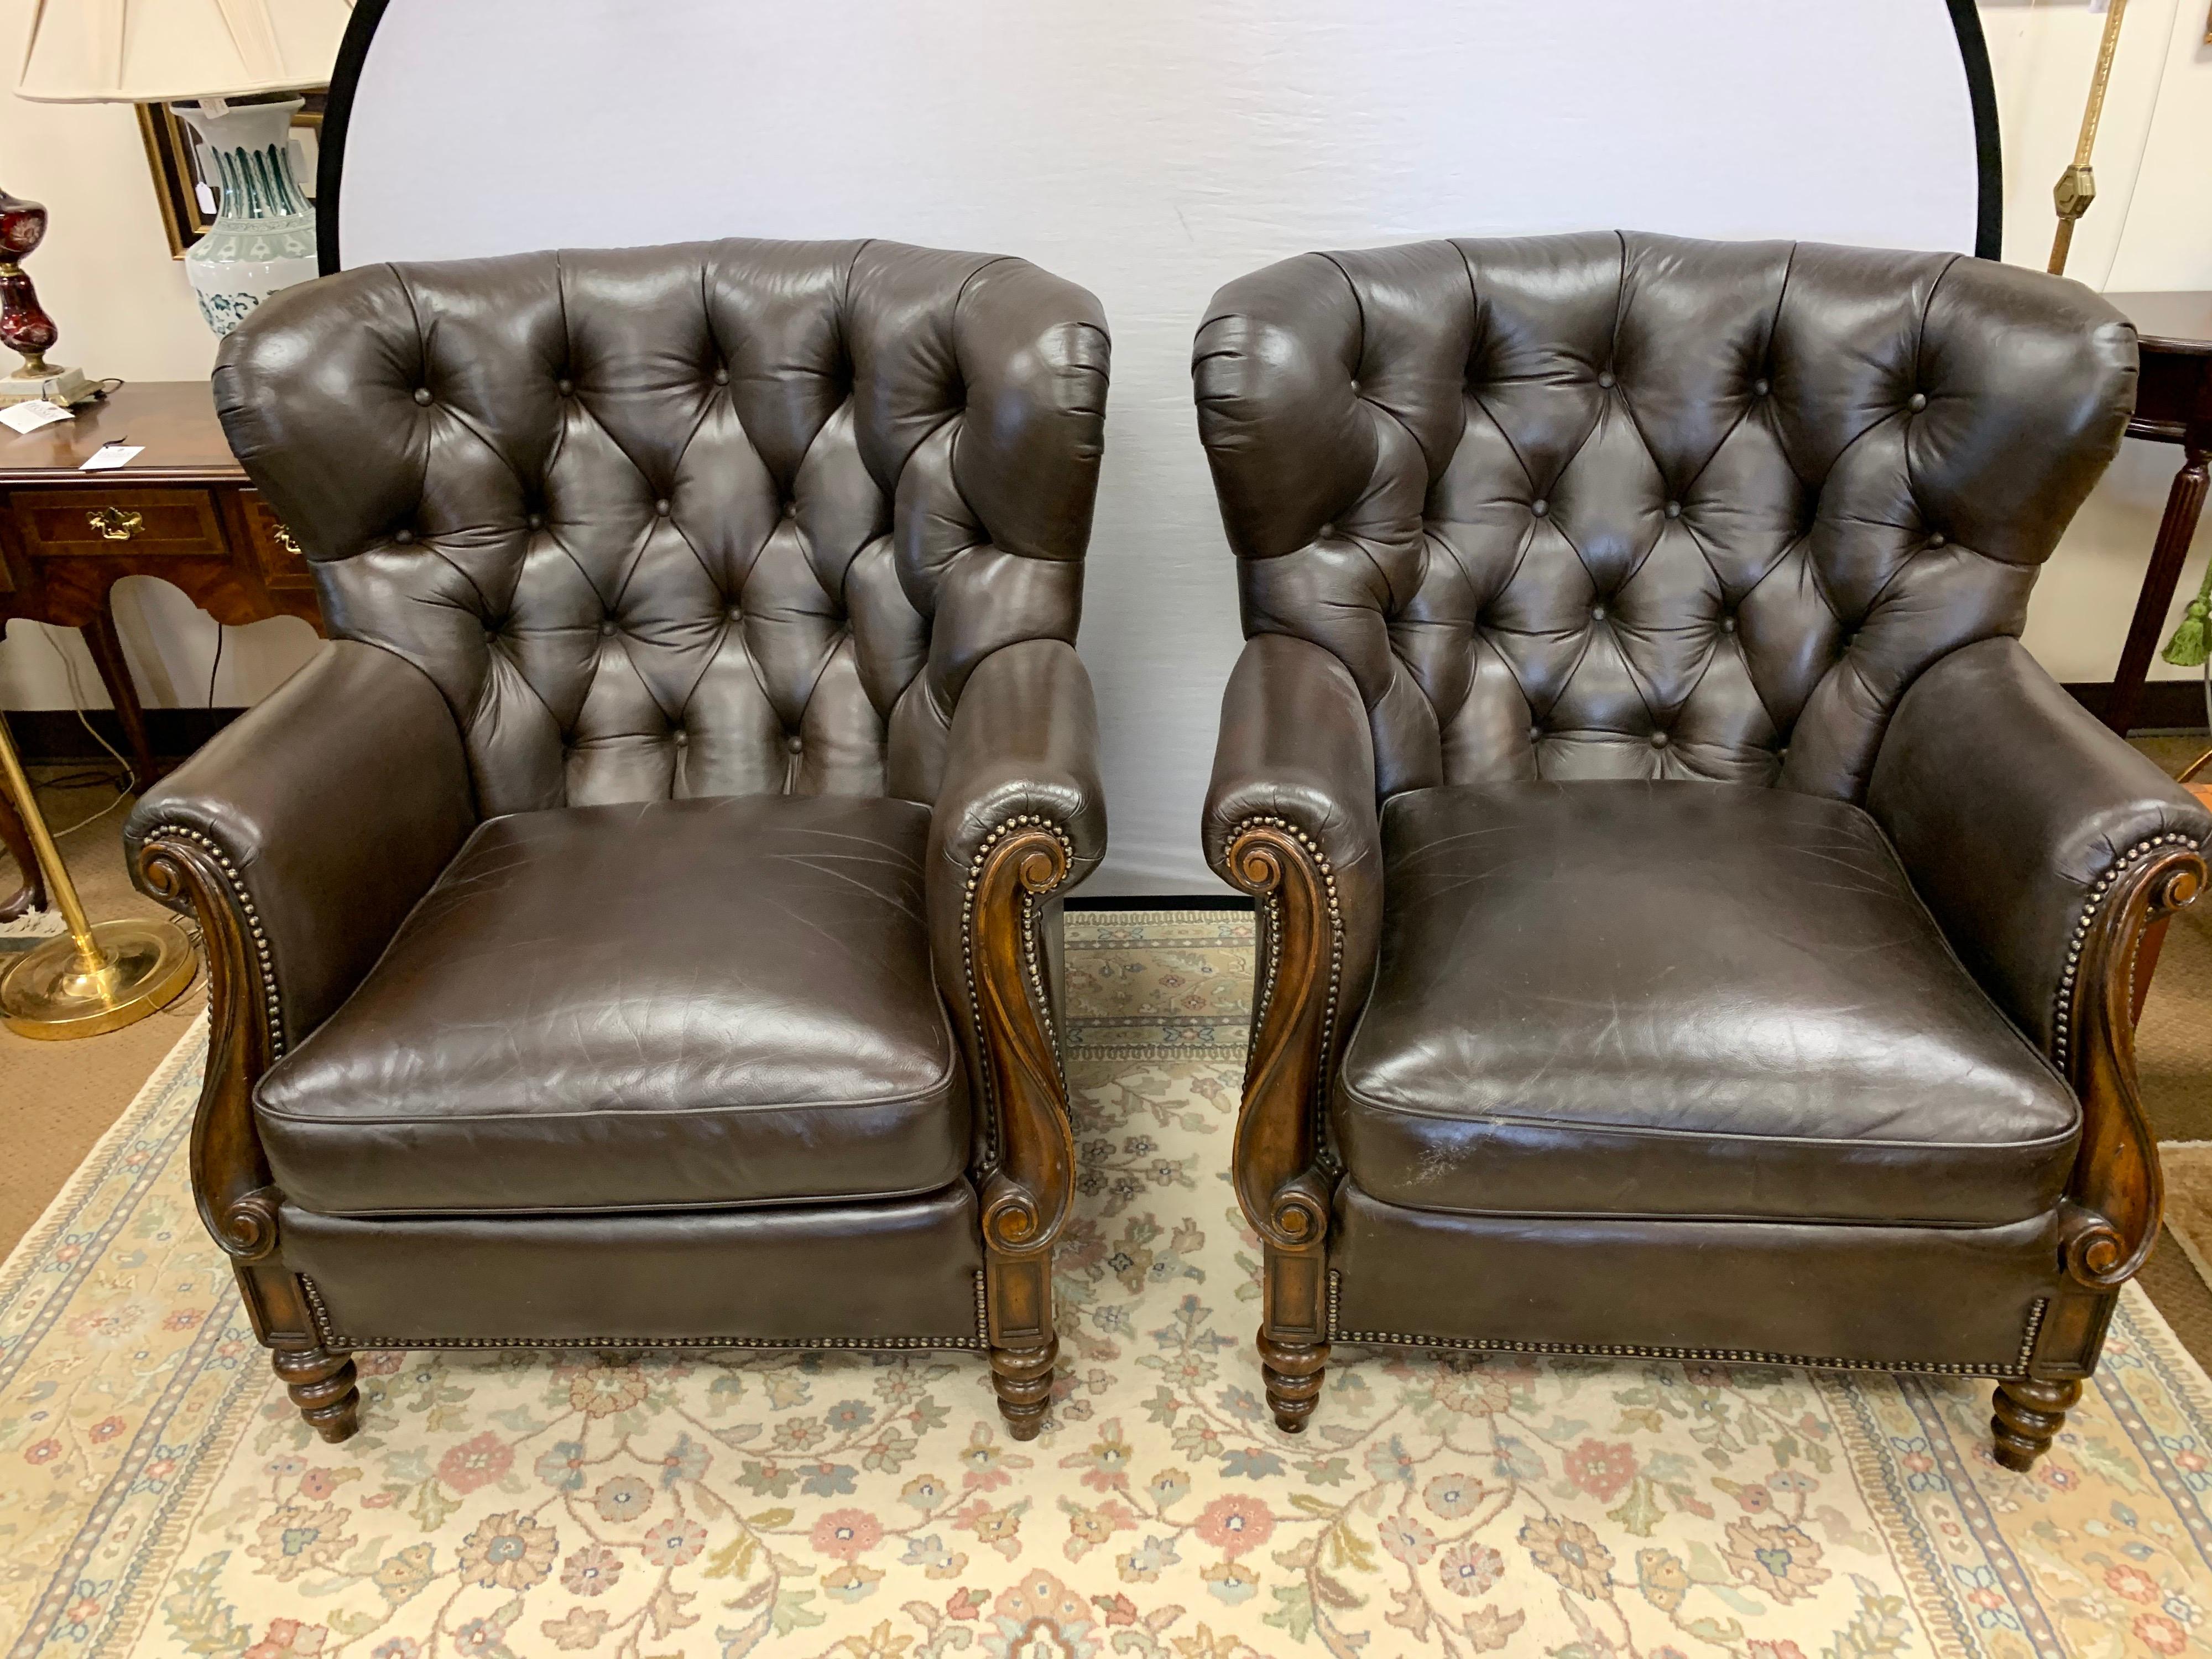 Handsome pair of matching Chesterfield tufted leather chairs with carved mahogany wood detail on arms and legs. Finished with brass nailheads all around. Super comfy for your library office or family room.